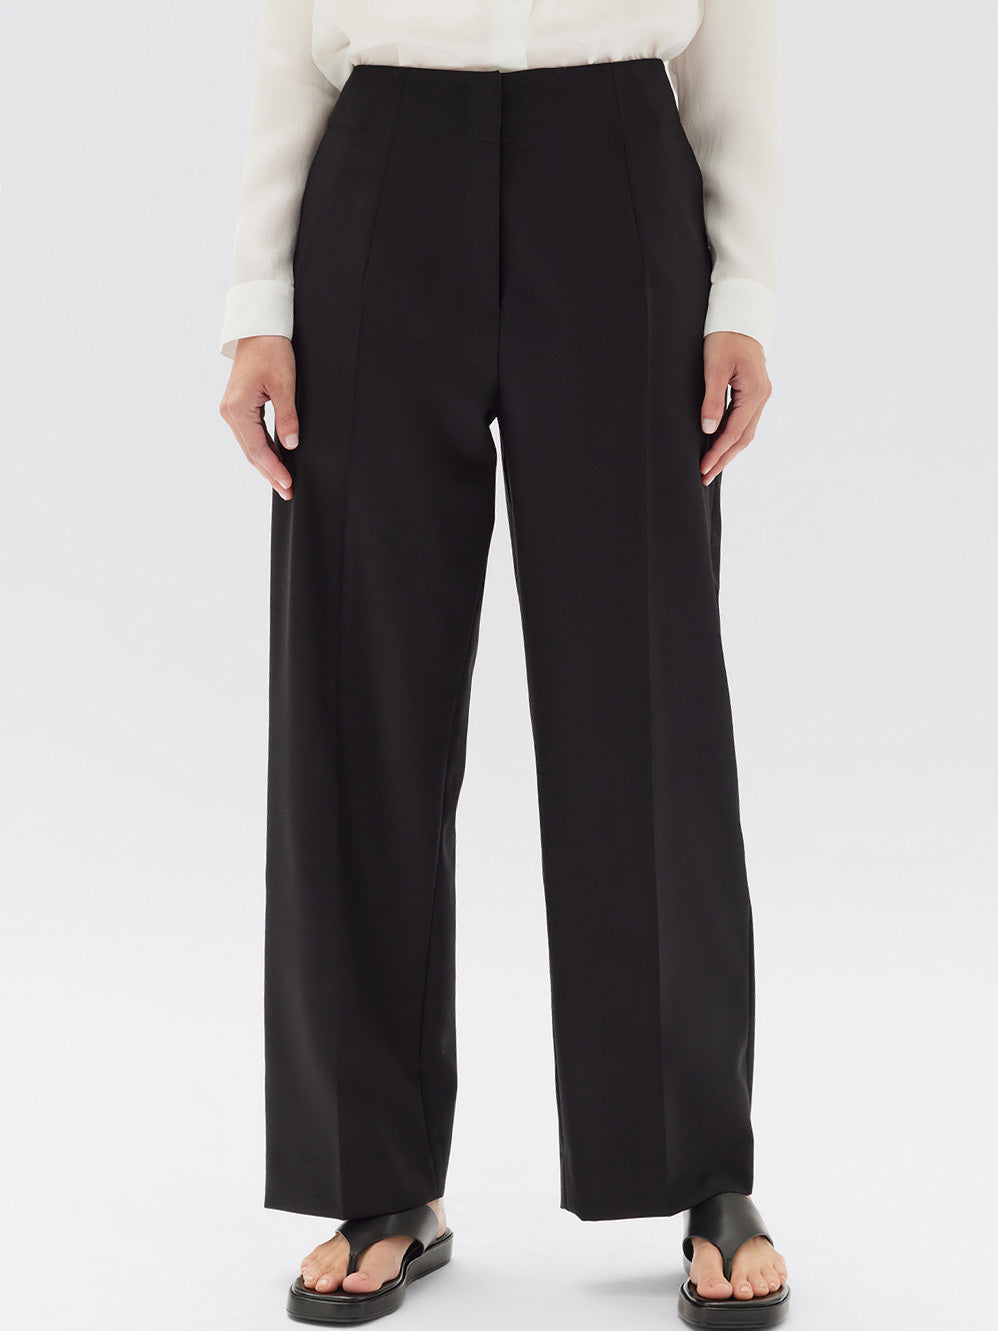 ASSEMBLY LABEL ISADORA WOOL TROUSER